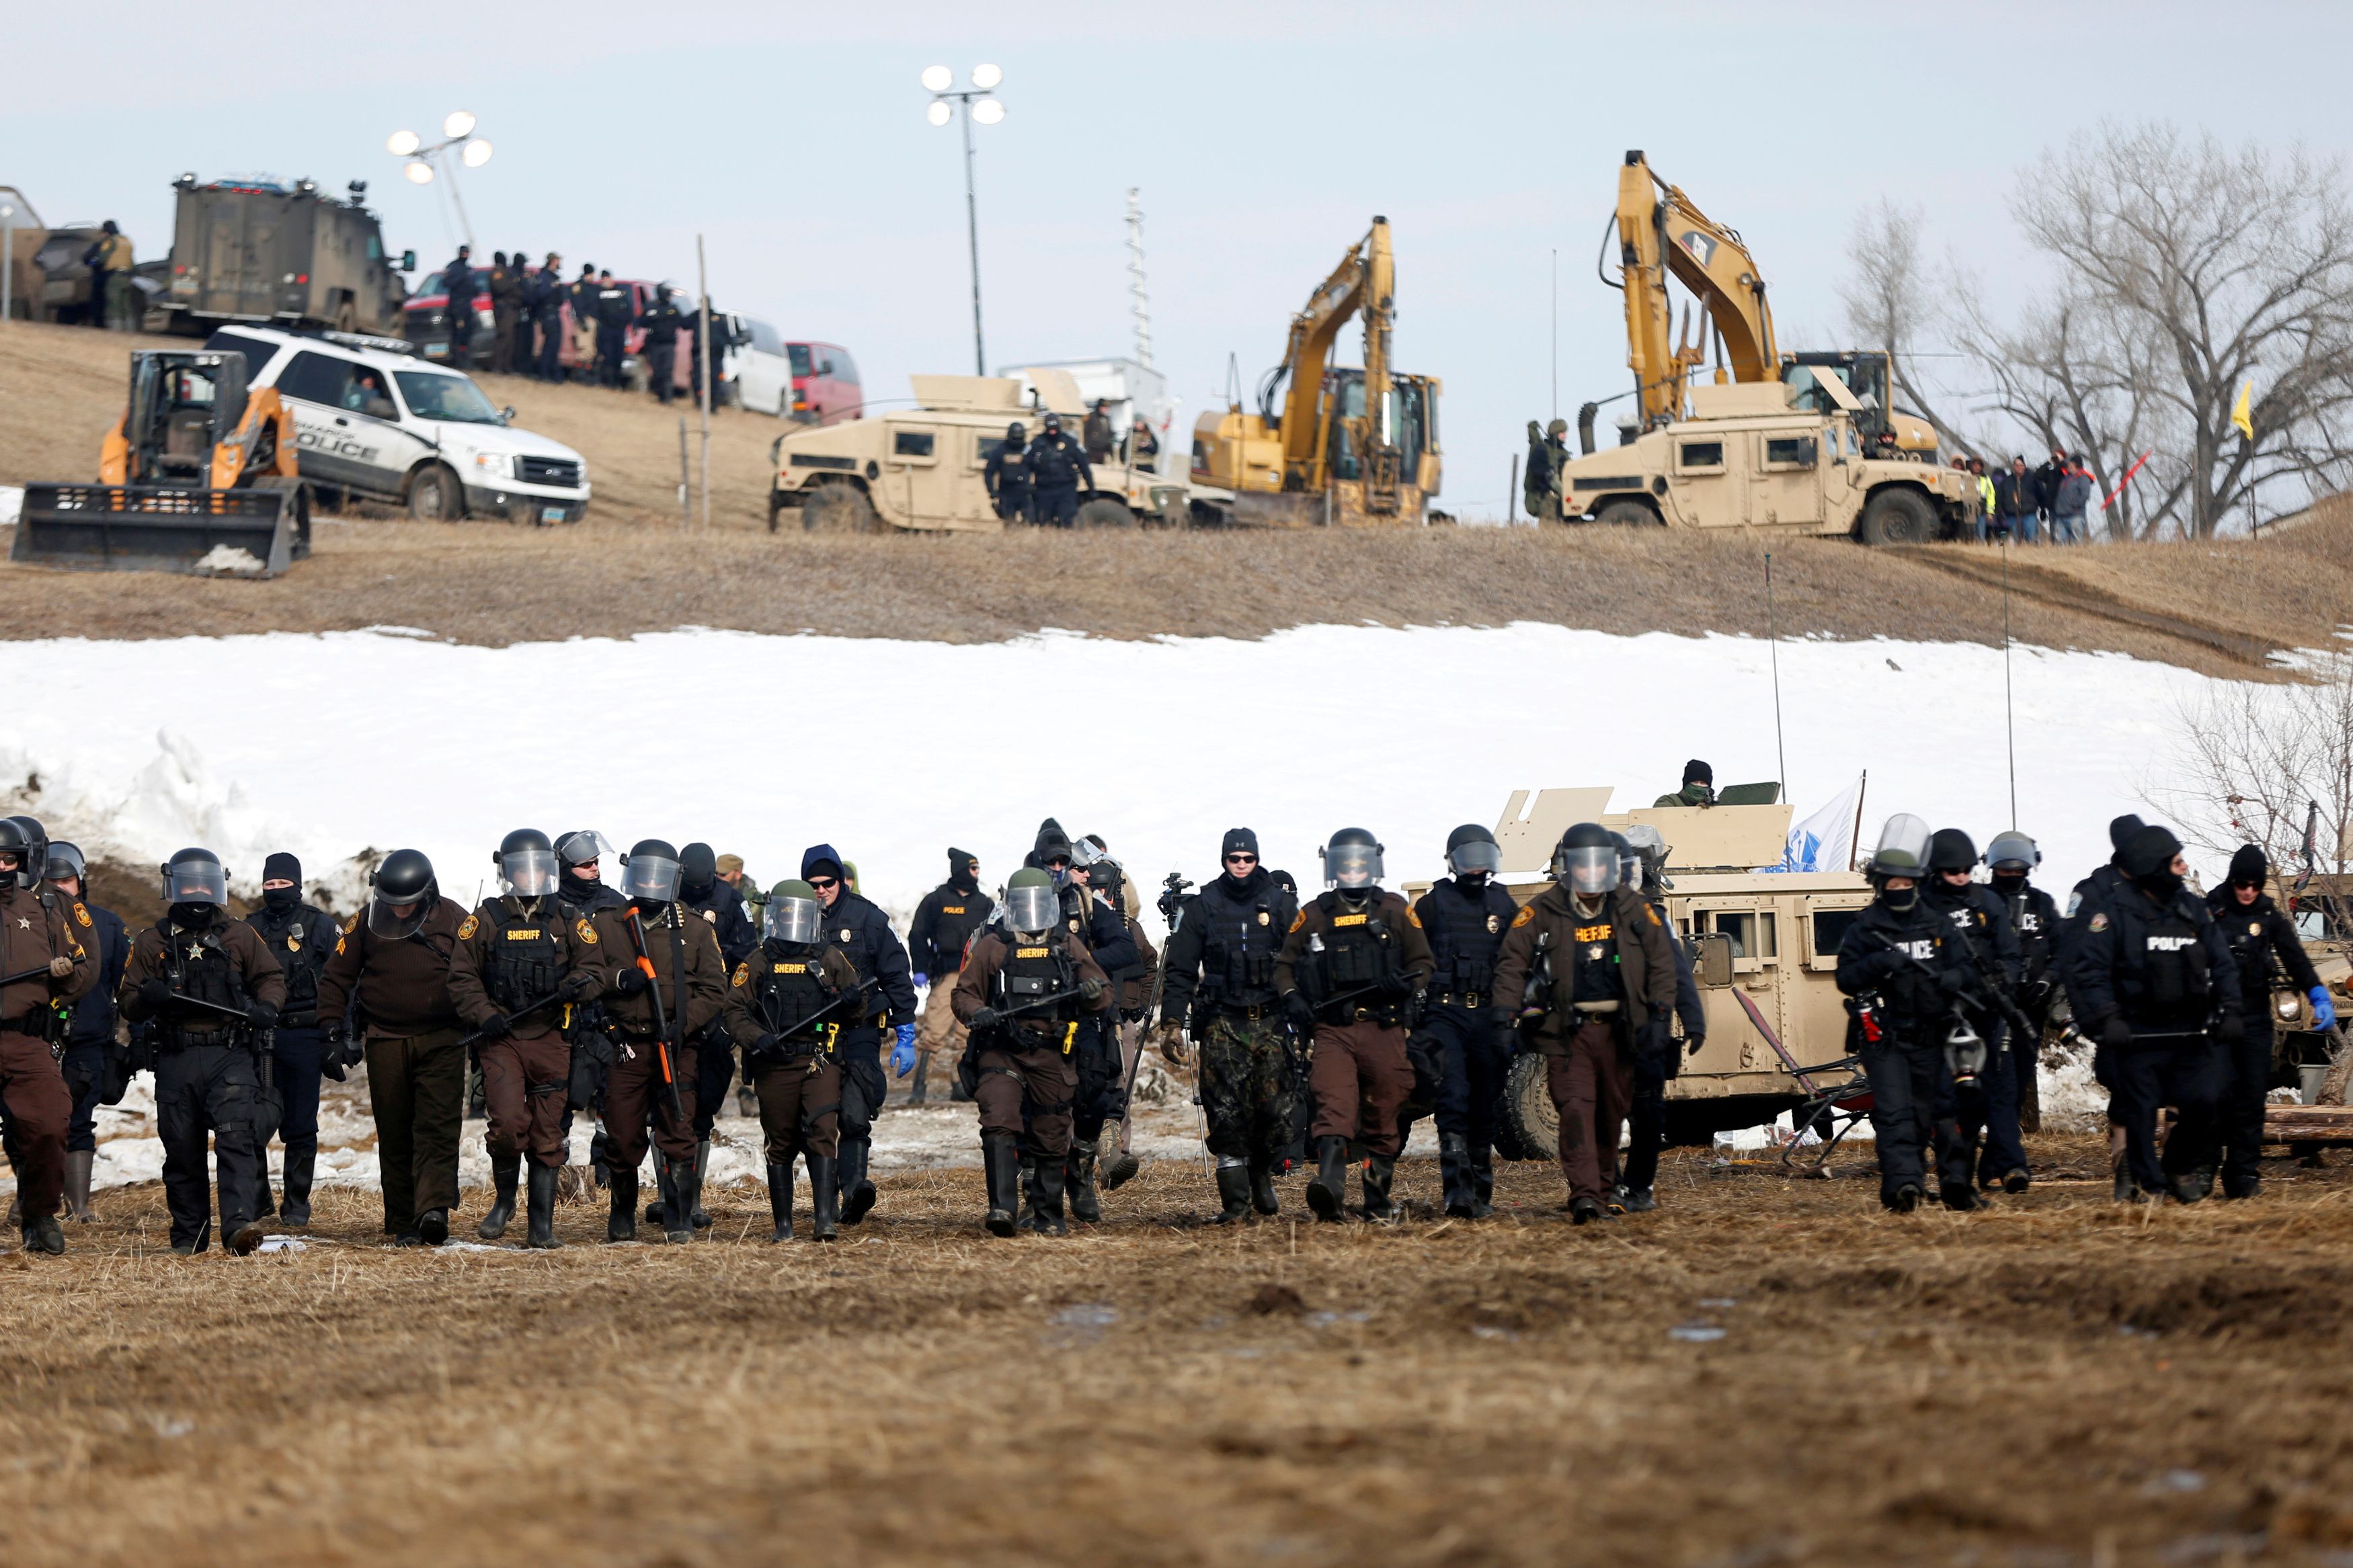 Law enforcement officers advance into the main opposition camp against the Dakota Access oil pipeline near Cannon Ball, North Dakota, U.S., February 23, 2017. REUTERS/Terray Sylvester/File Photo